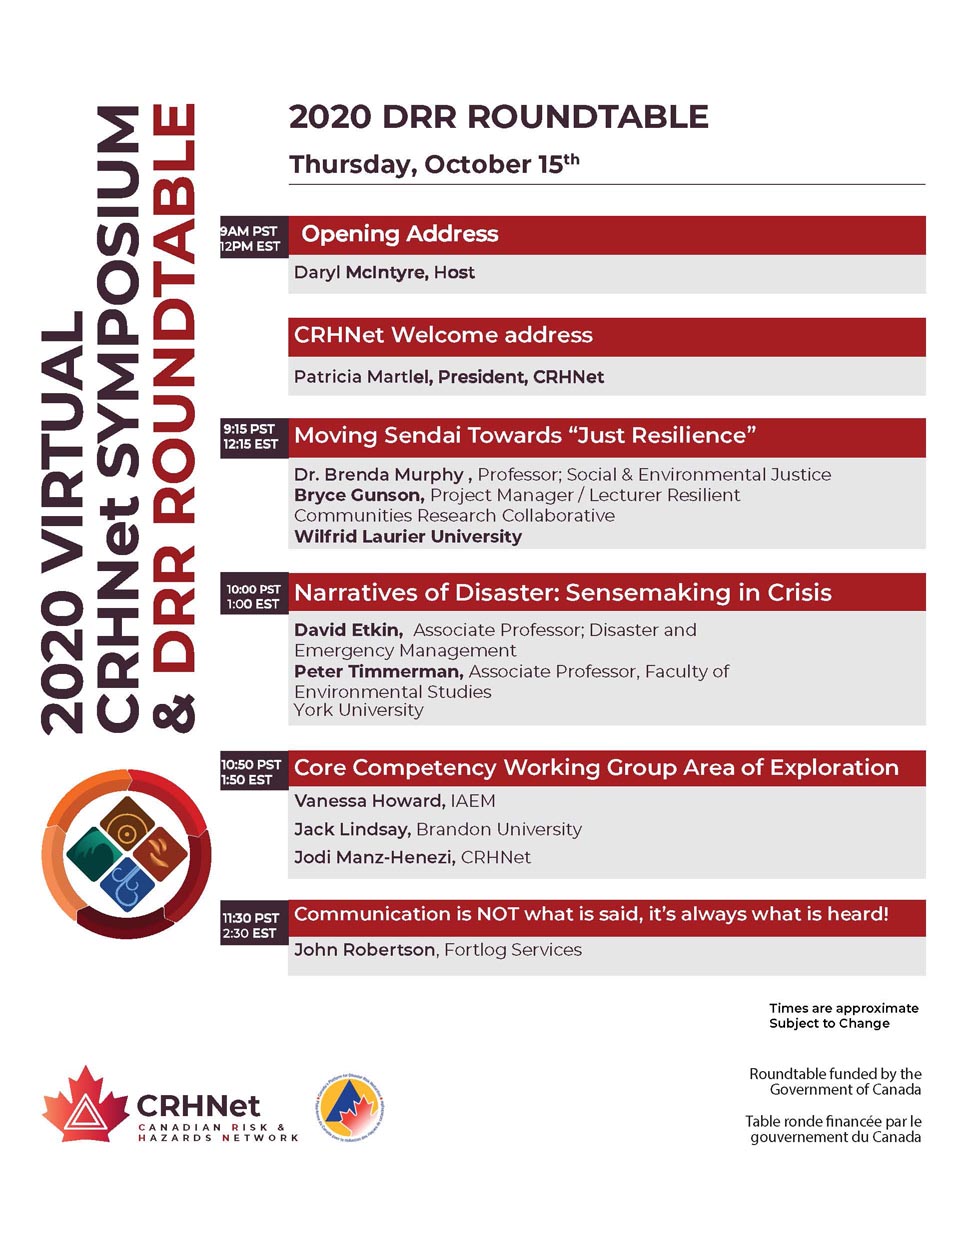 October 15, 2020 – Series Introduction and DRR Roundtable